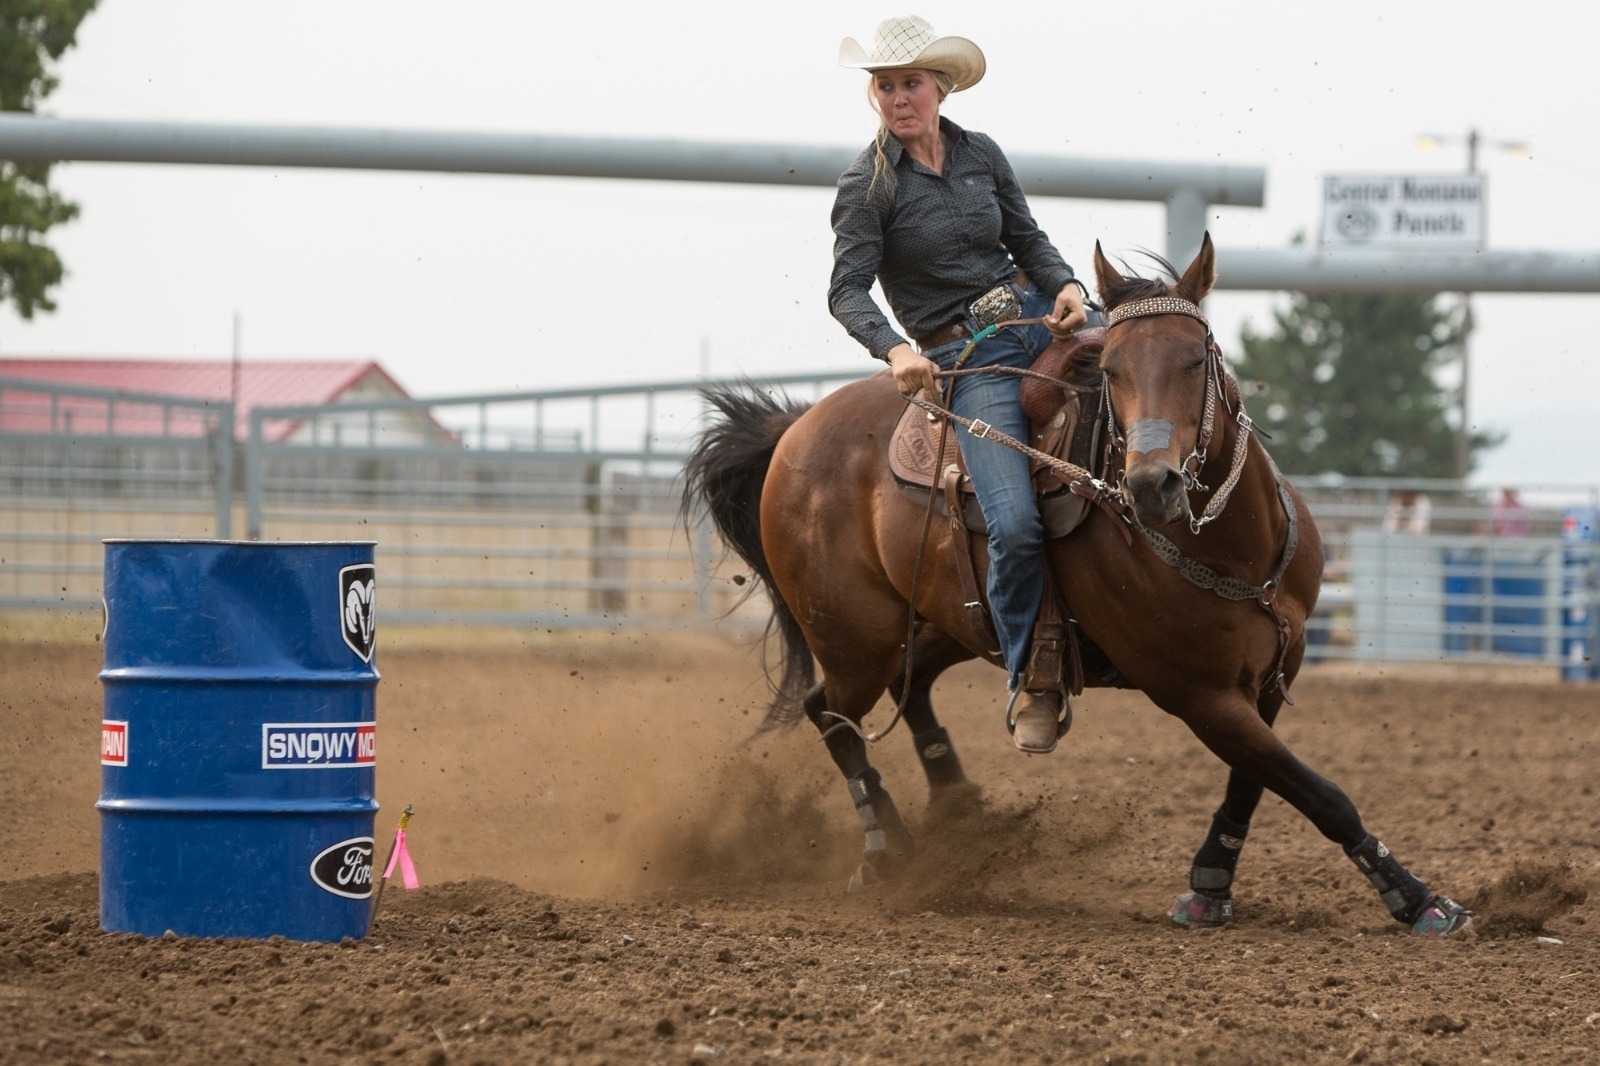 Sadie Johnson competes in a barrel racing event on her horse, Rocket, at the Lewistown Rodeo in August 2018, part of the Montana High School Rodeo Association. Sadie has been competing since 8th grade. Photo by Louise Johns